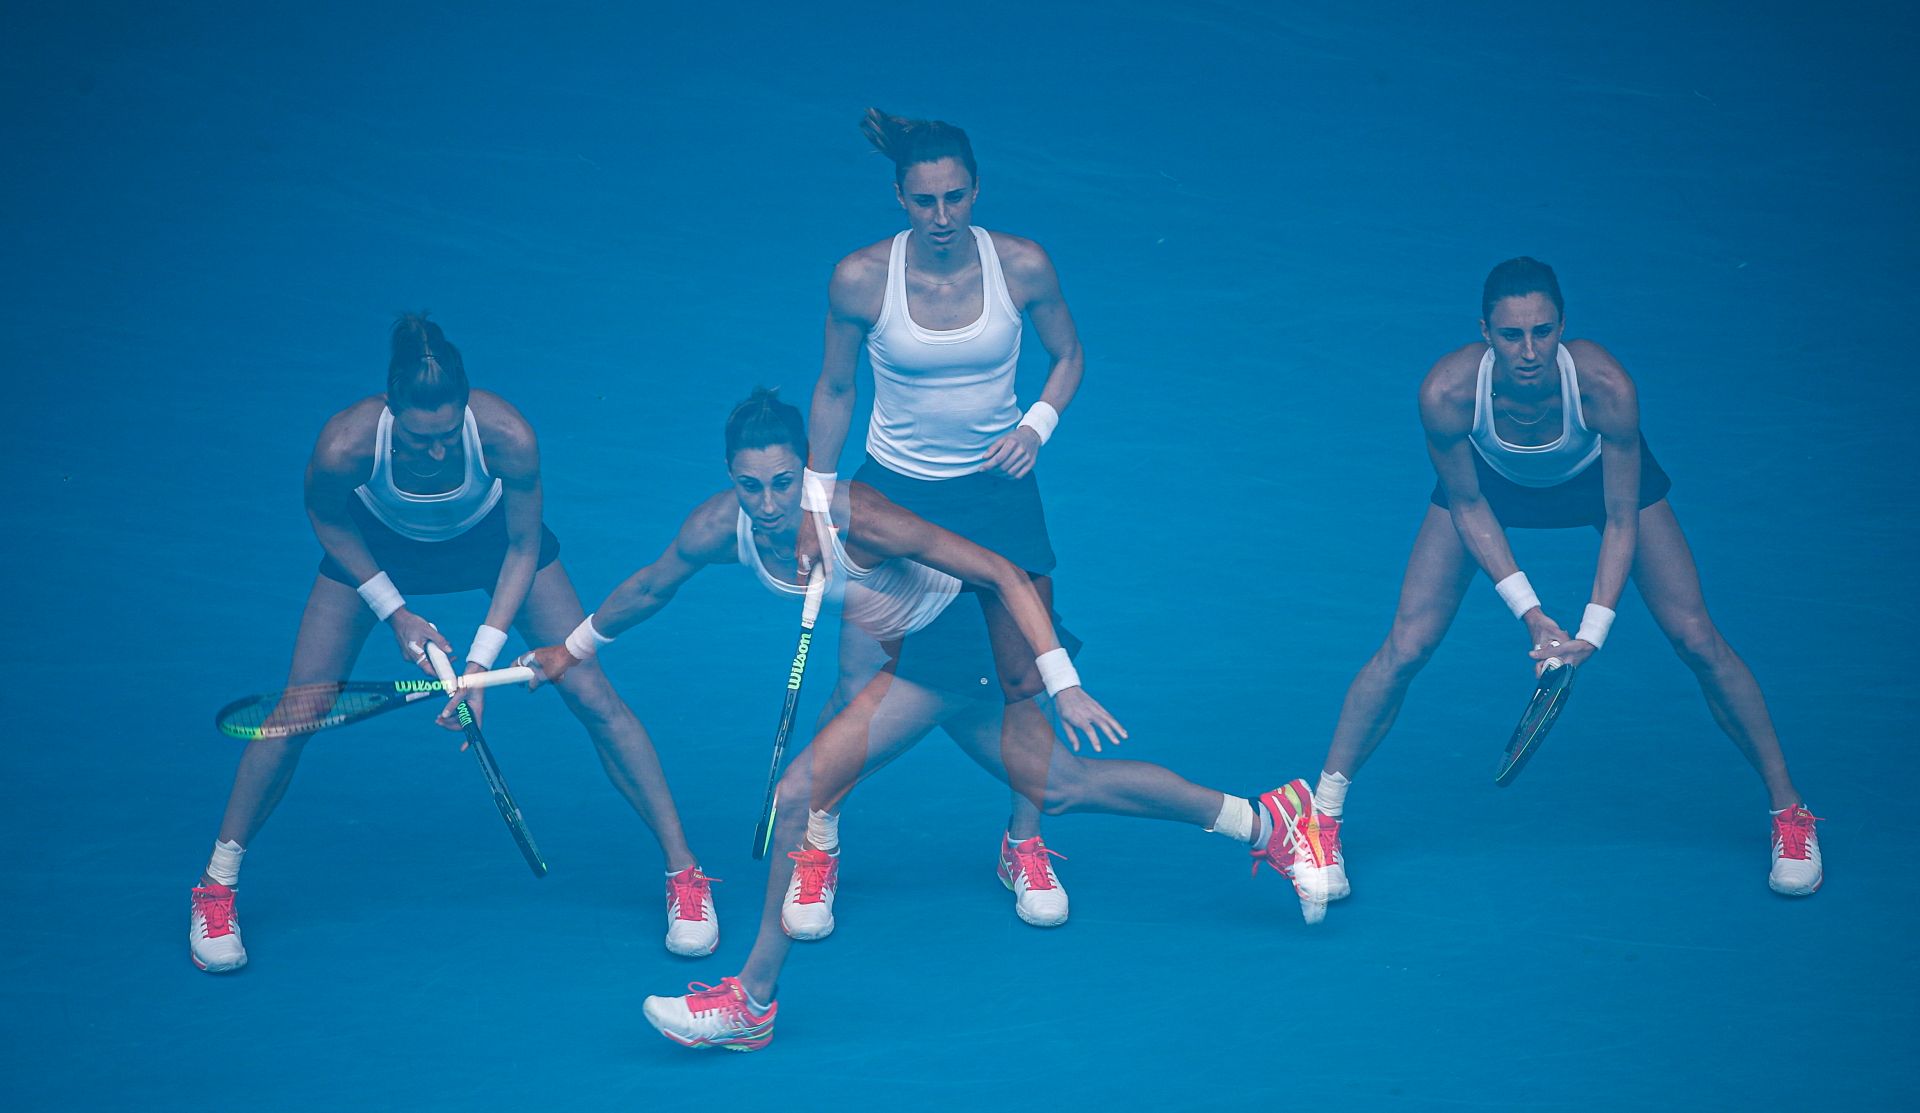 epa08149917 A multiple exposure showing Petra Martic of Croatia in action during her women's singles second round match against Julia Goerges of Germany at the Australian Open Grand Slam tennis tournament in Melbourne, Australia, 22 January 2020. EPA/ROMAN PILIPEY